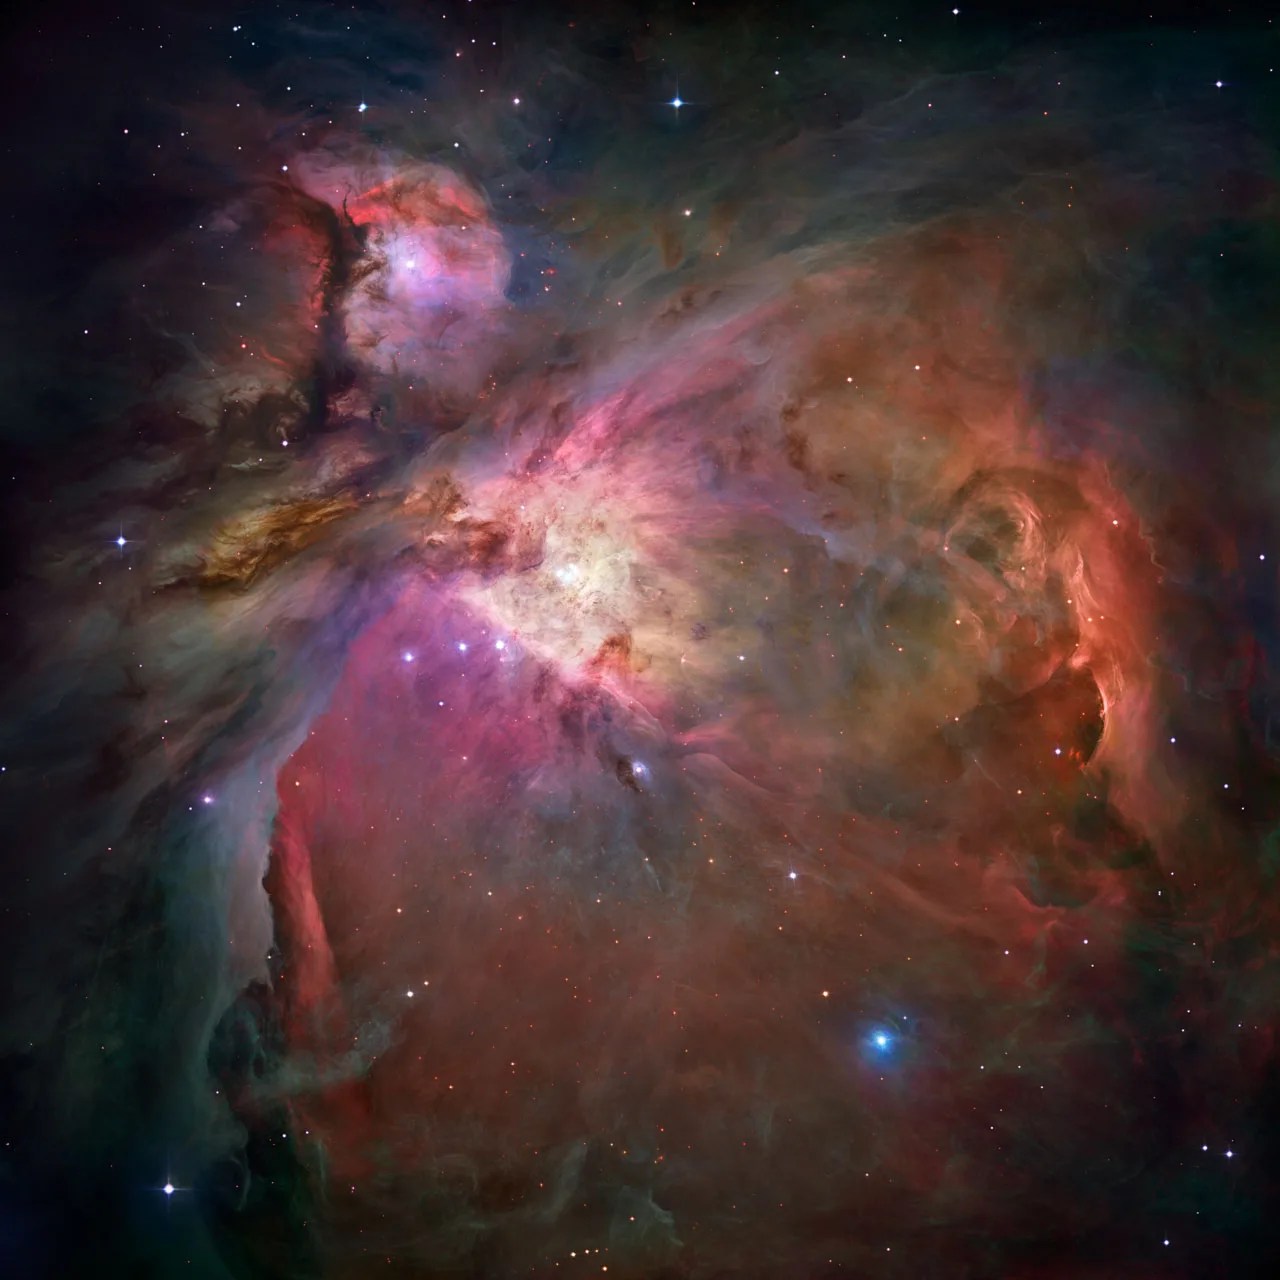 An intense cloud of red, purple, brown and similar color gas that is the Orion Nebula that includes pockets of starbirth.